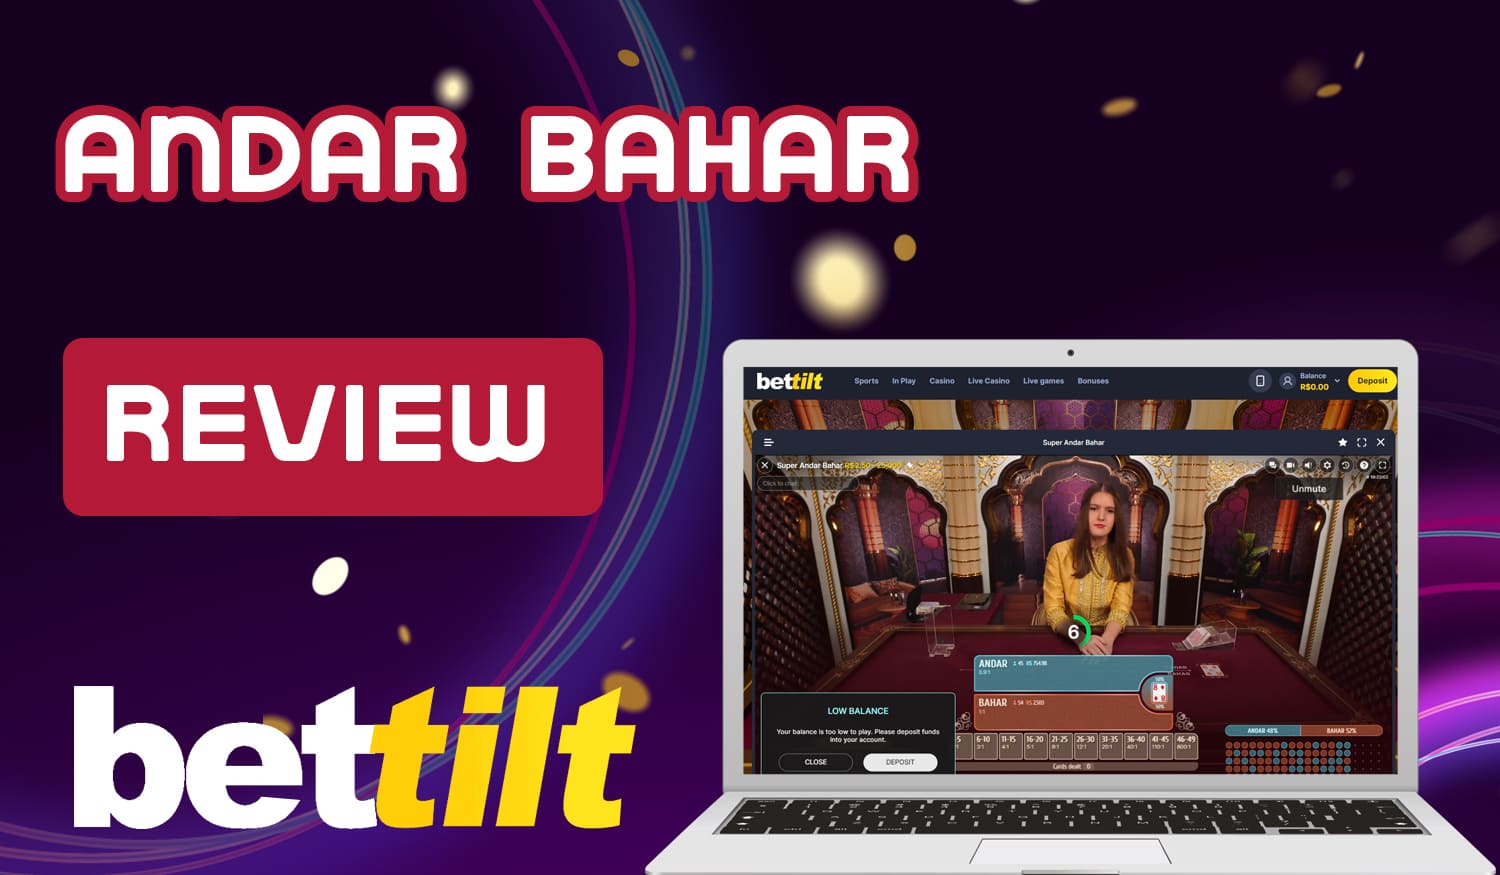 Rules and features of the game Andar Bahar on the site of online casino Bettilt